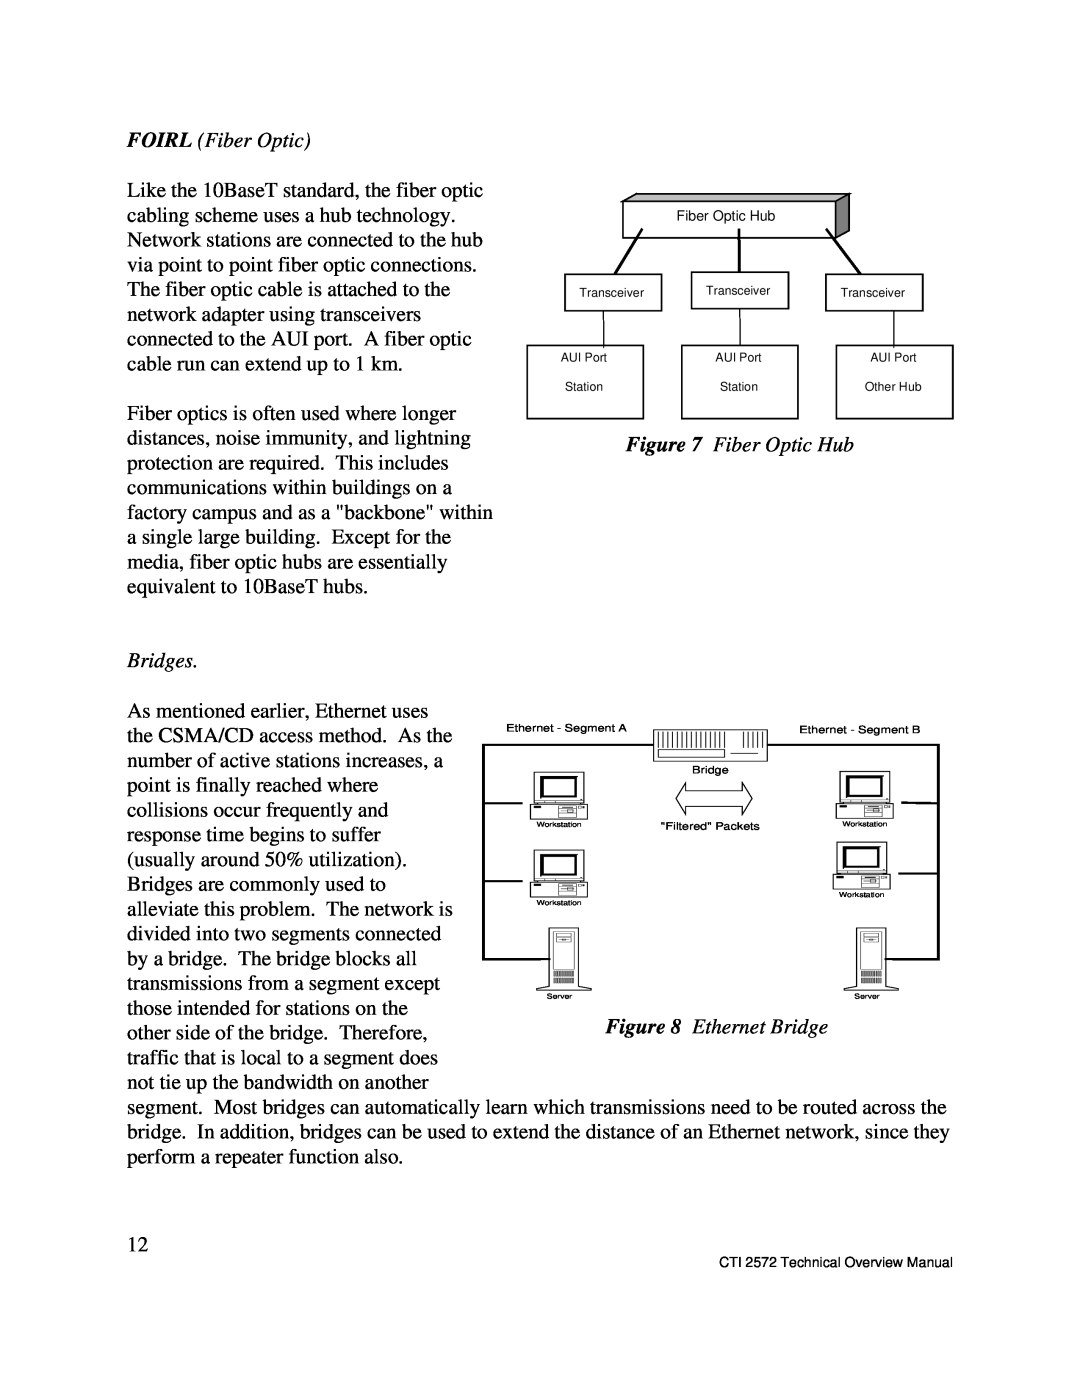 IBM CTI 2572 manual As mentioned earlier, Ethernet uses 